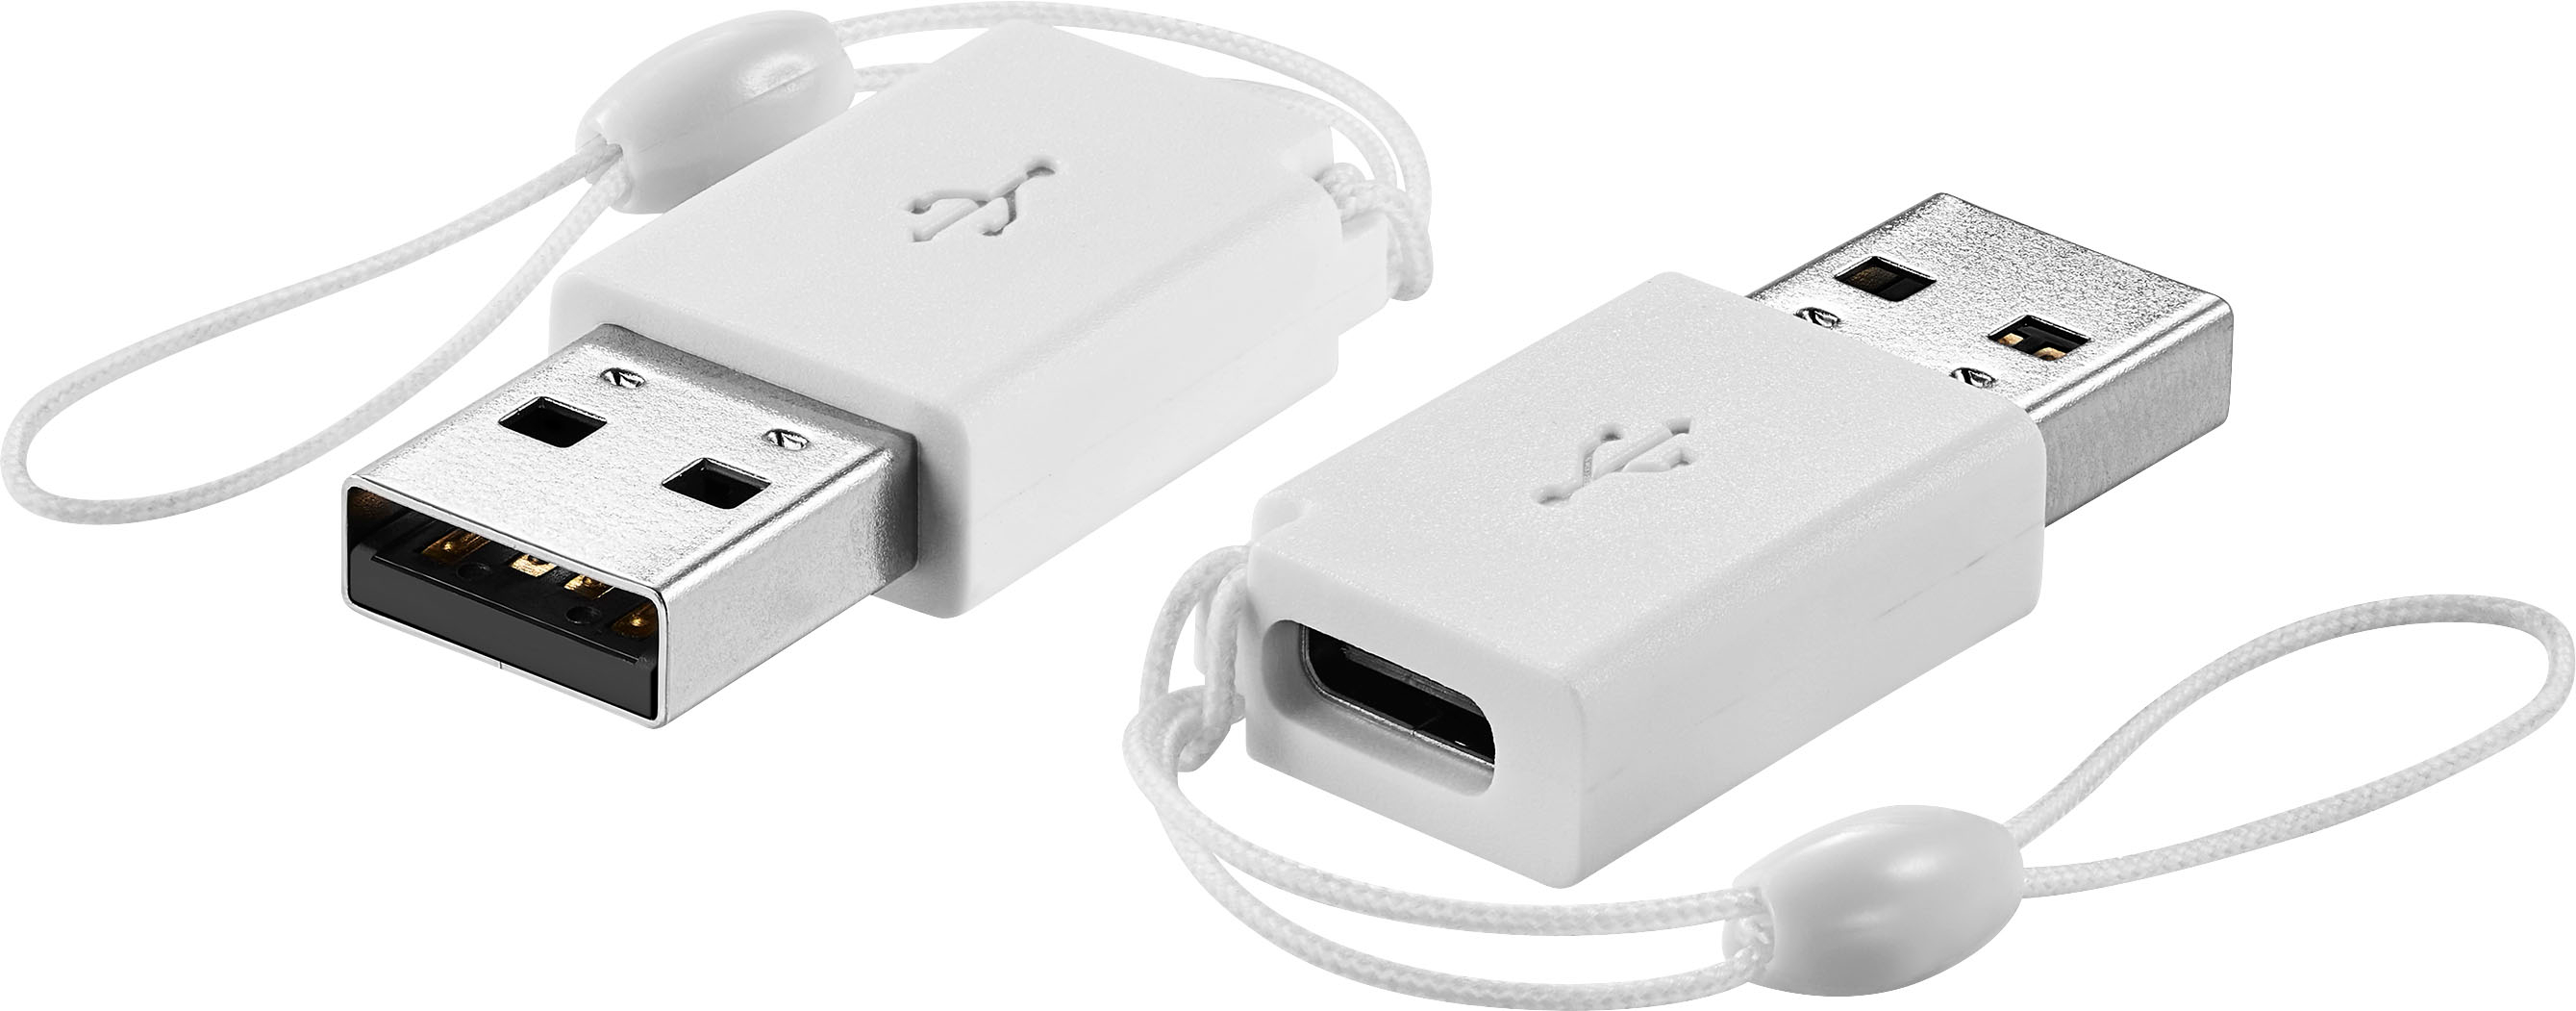 Best Buy essentials™ Female USB-C to Male USB Adapter (2-Pack